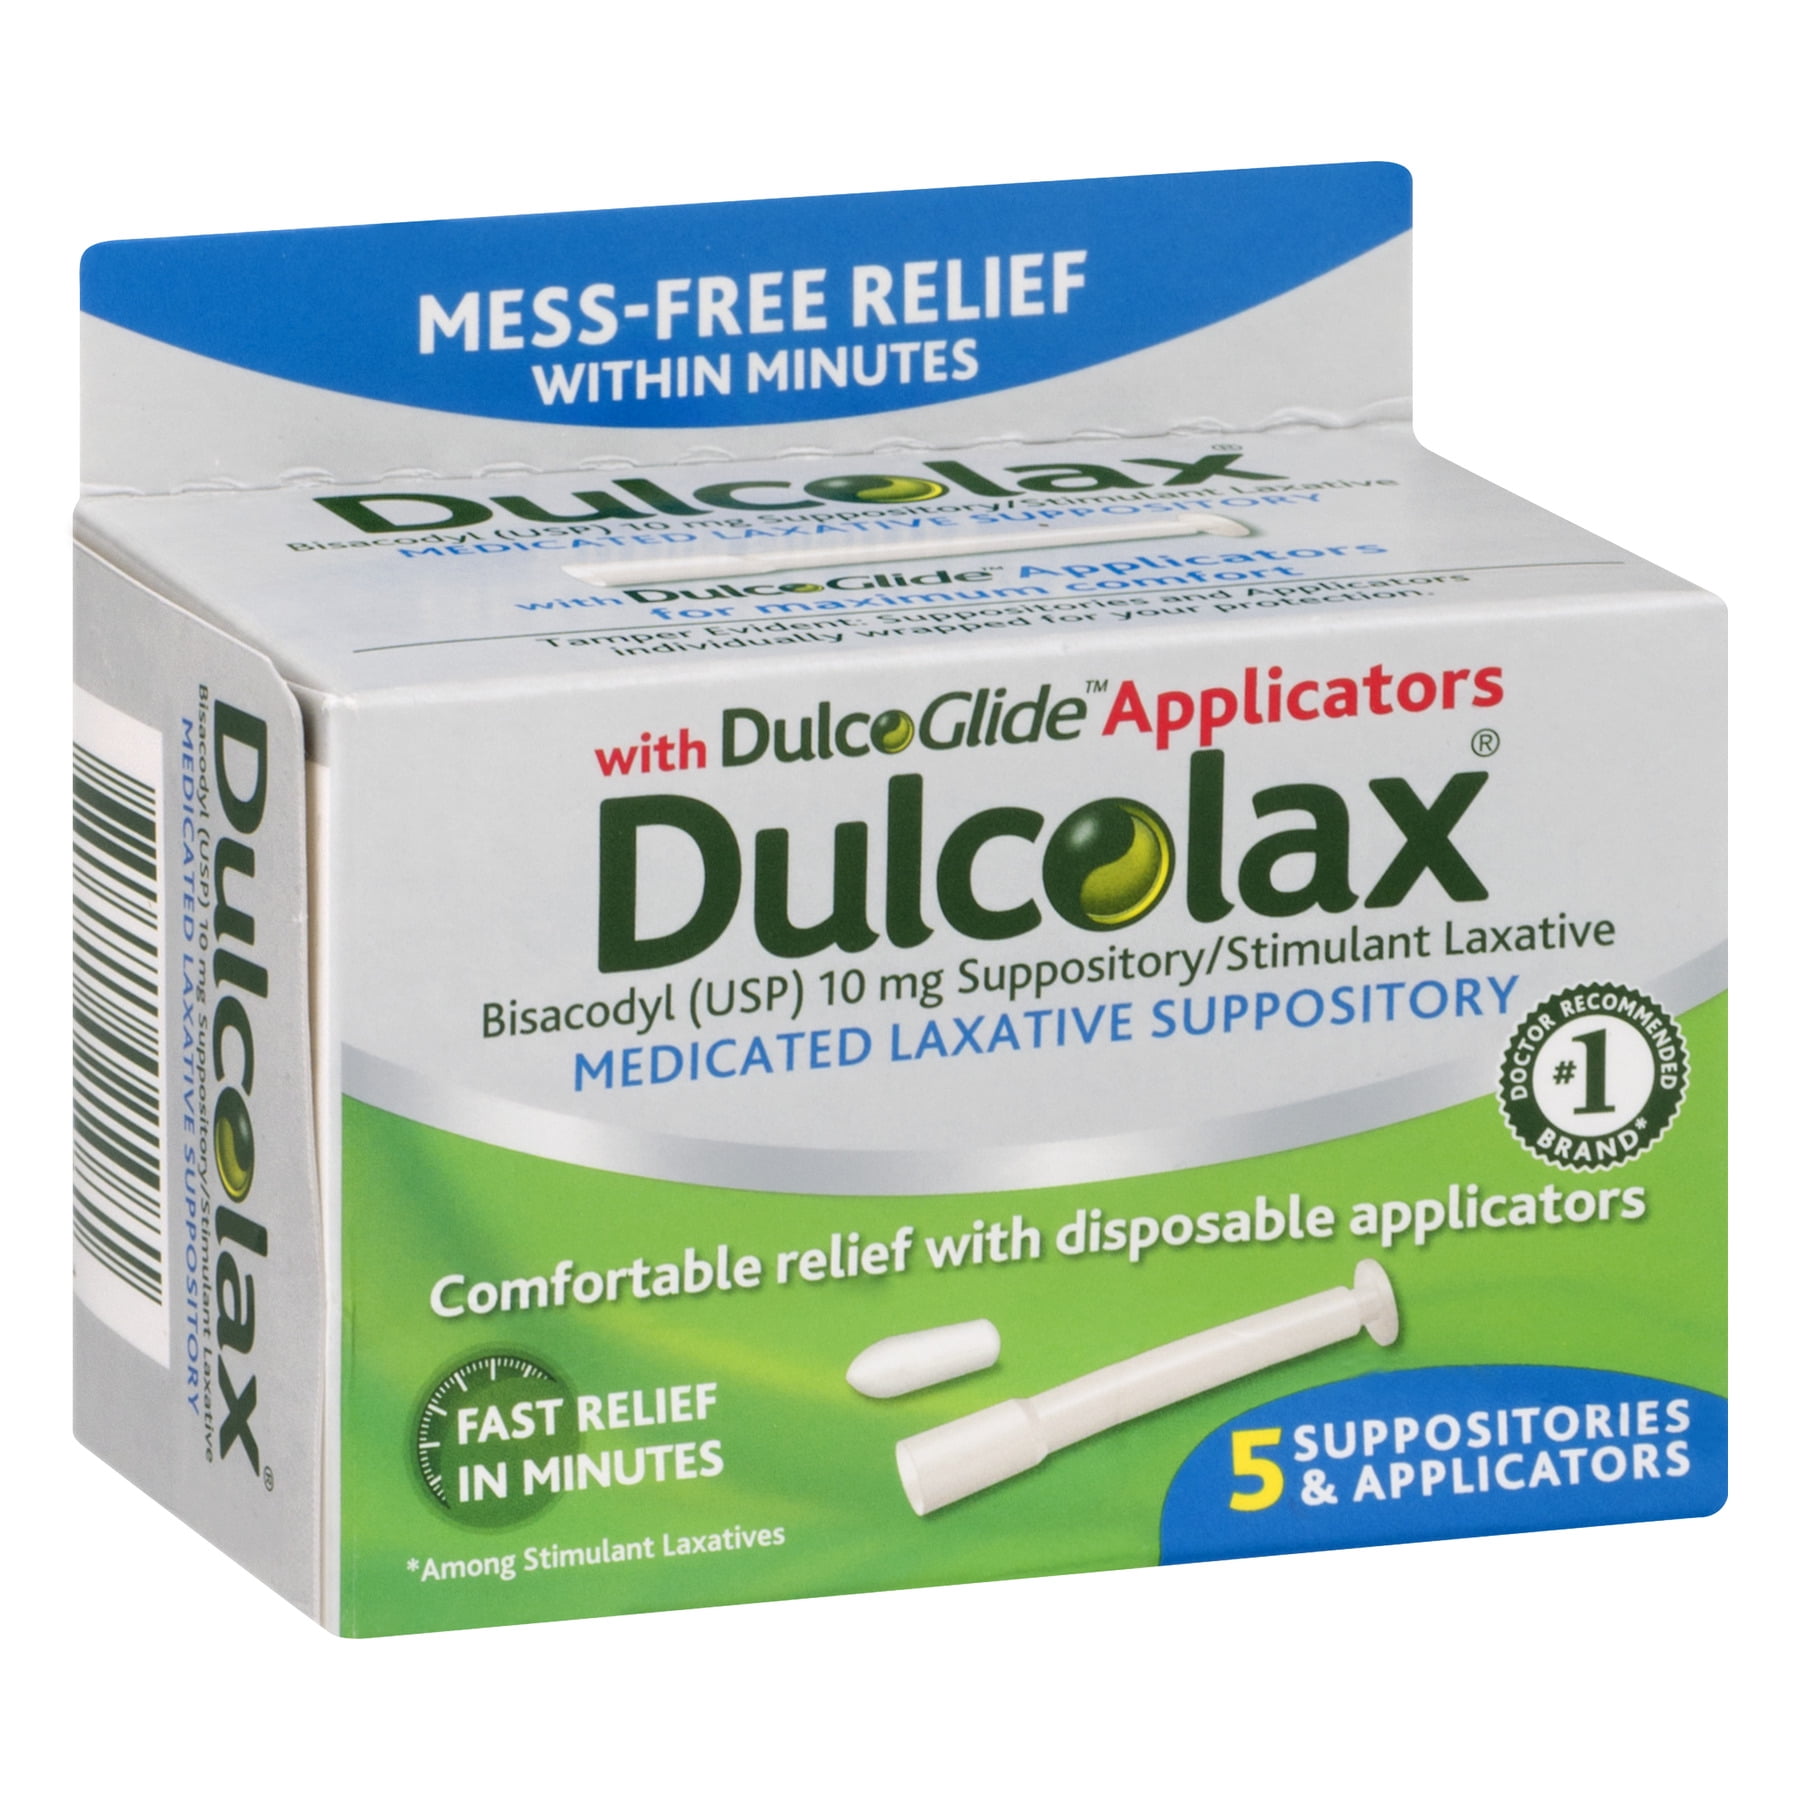 Dulcolax Medicated Laxative Suppository 16 Comfort Shaped Suppositories  04/2025^ 681421021333